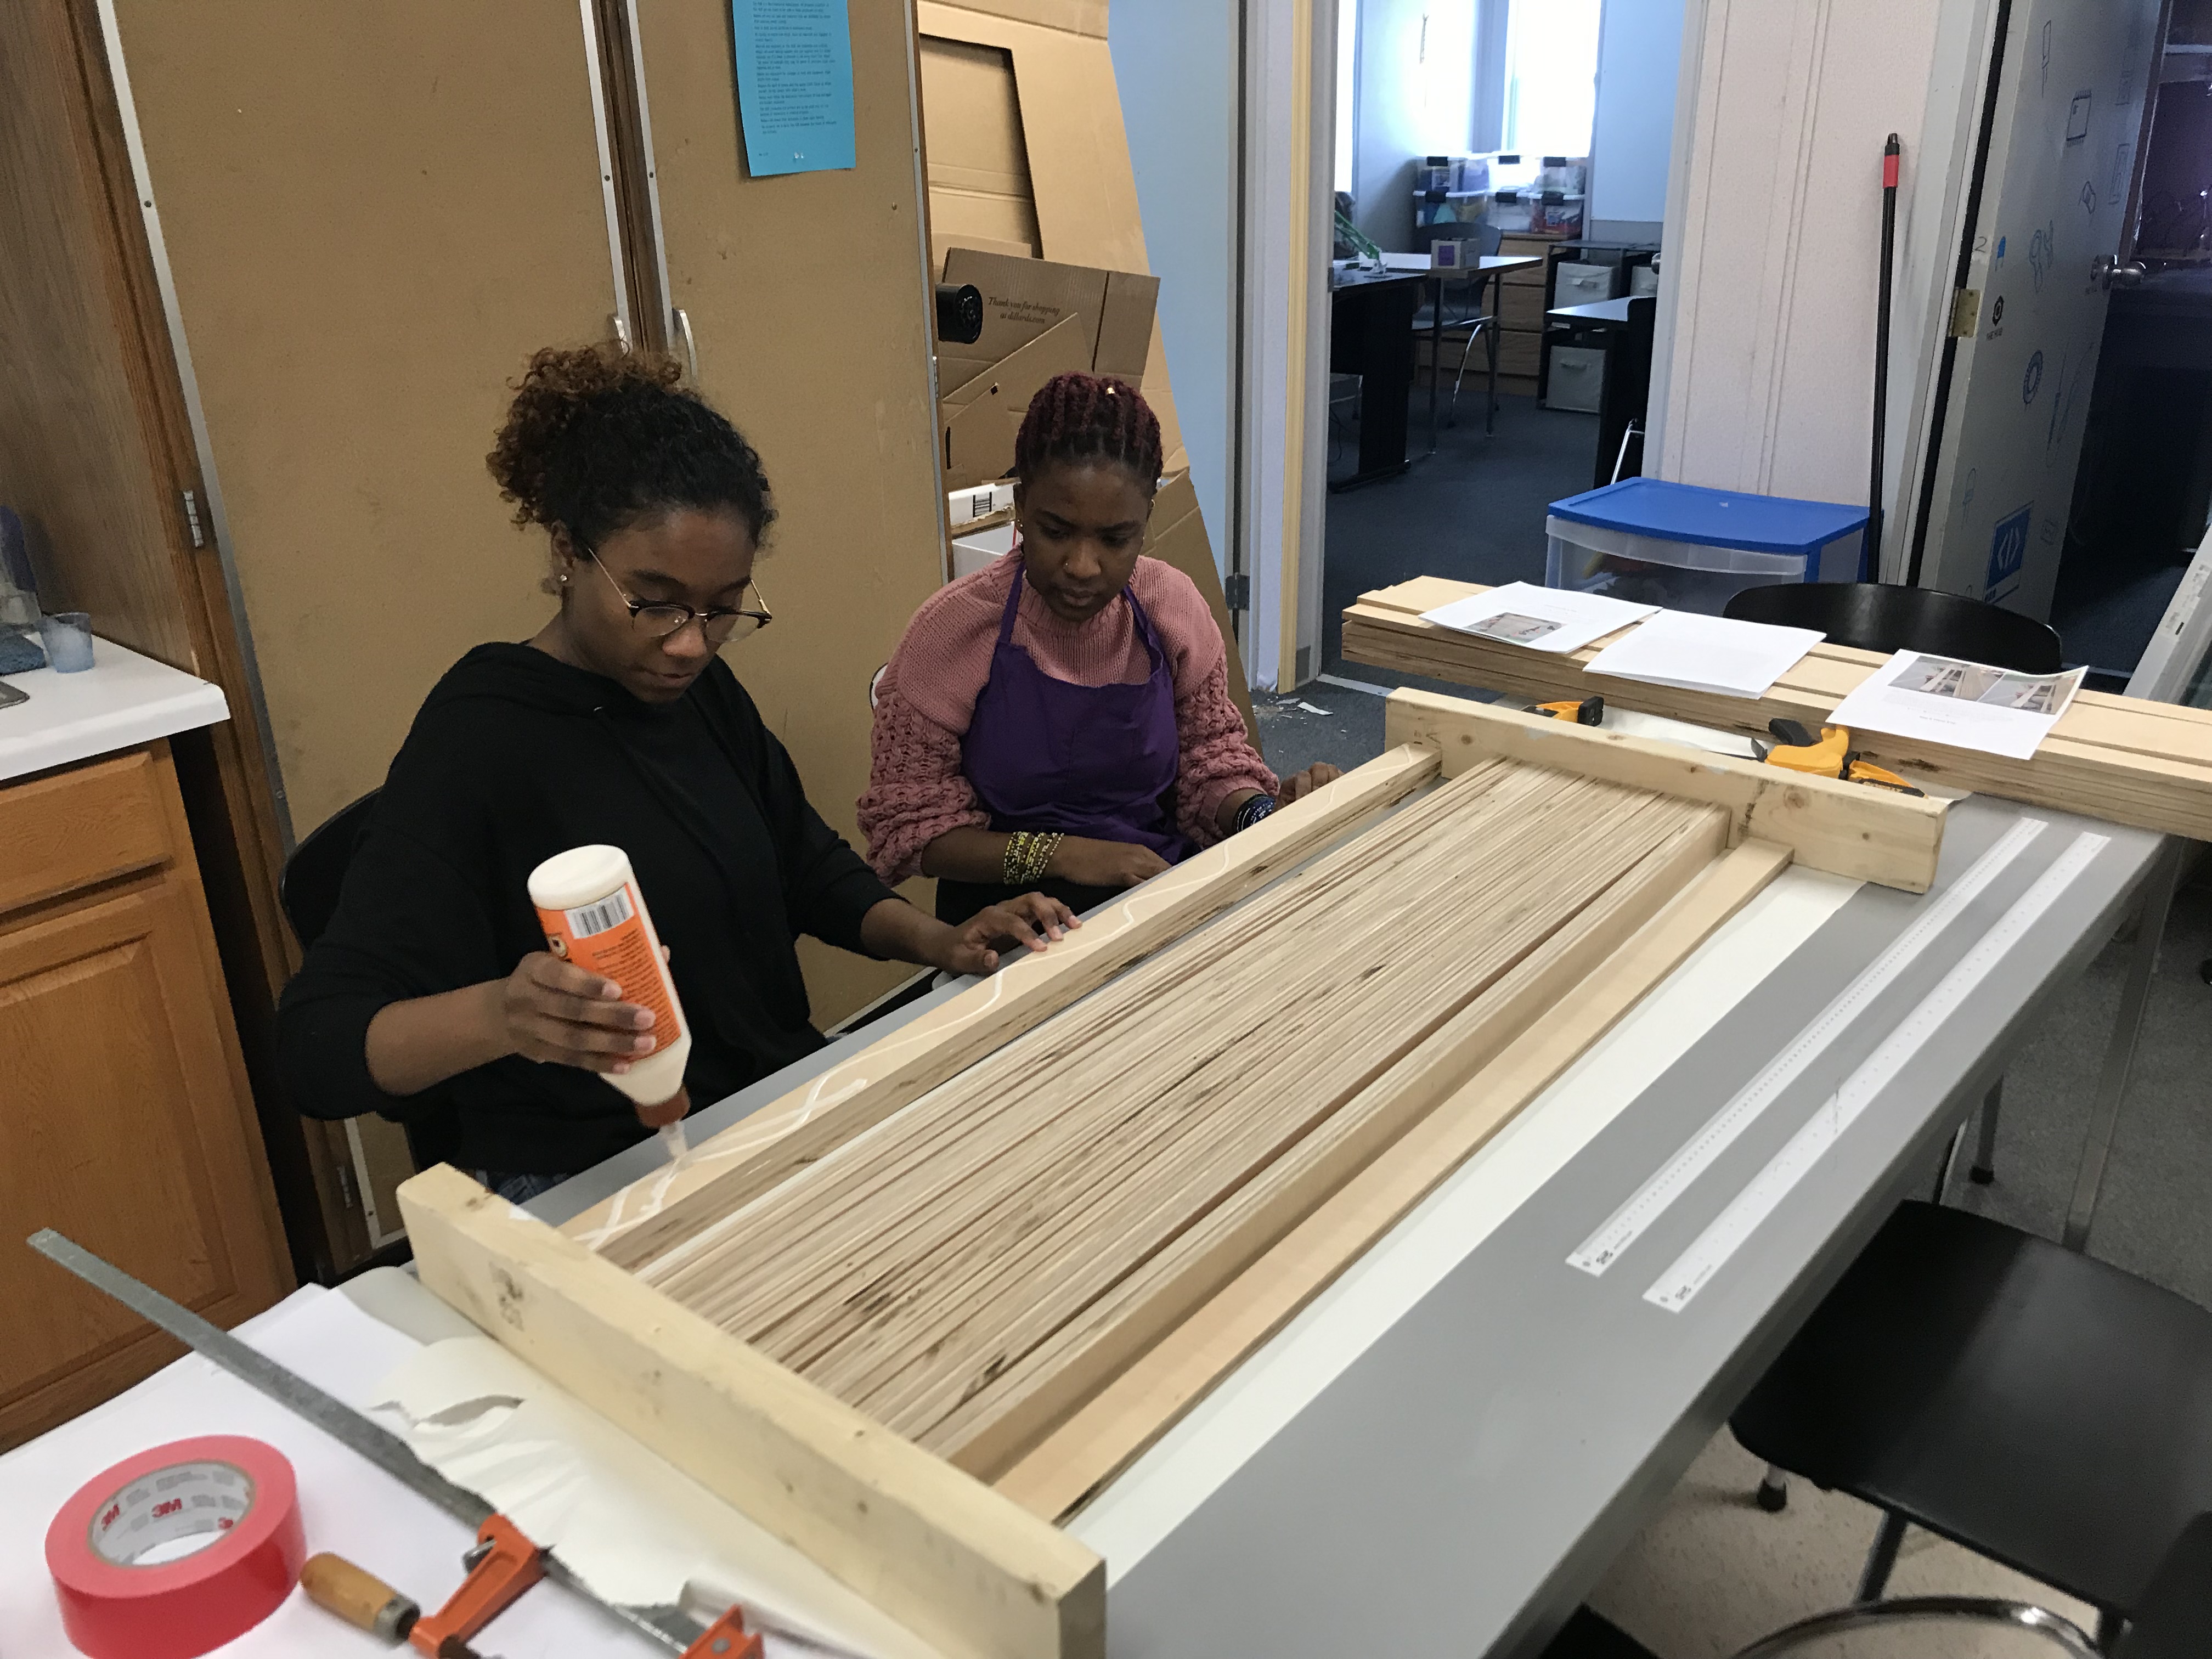 Skidmore College students working on a project at the IdeaLab Makerspace